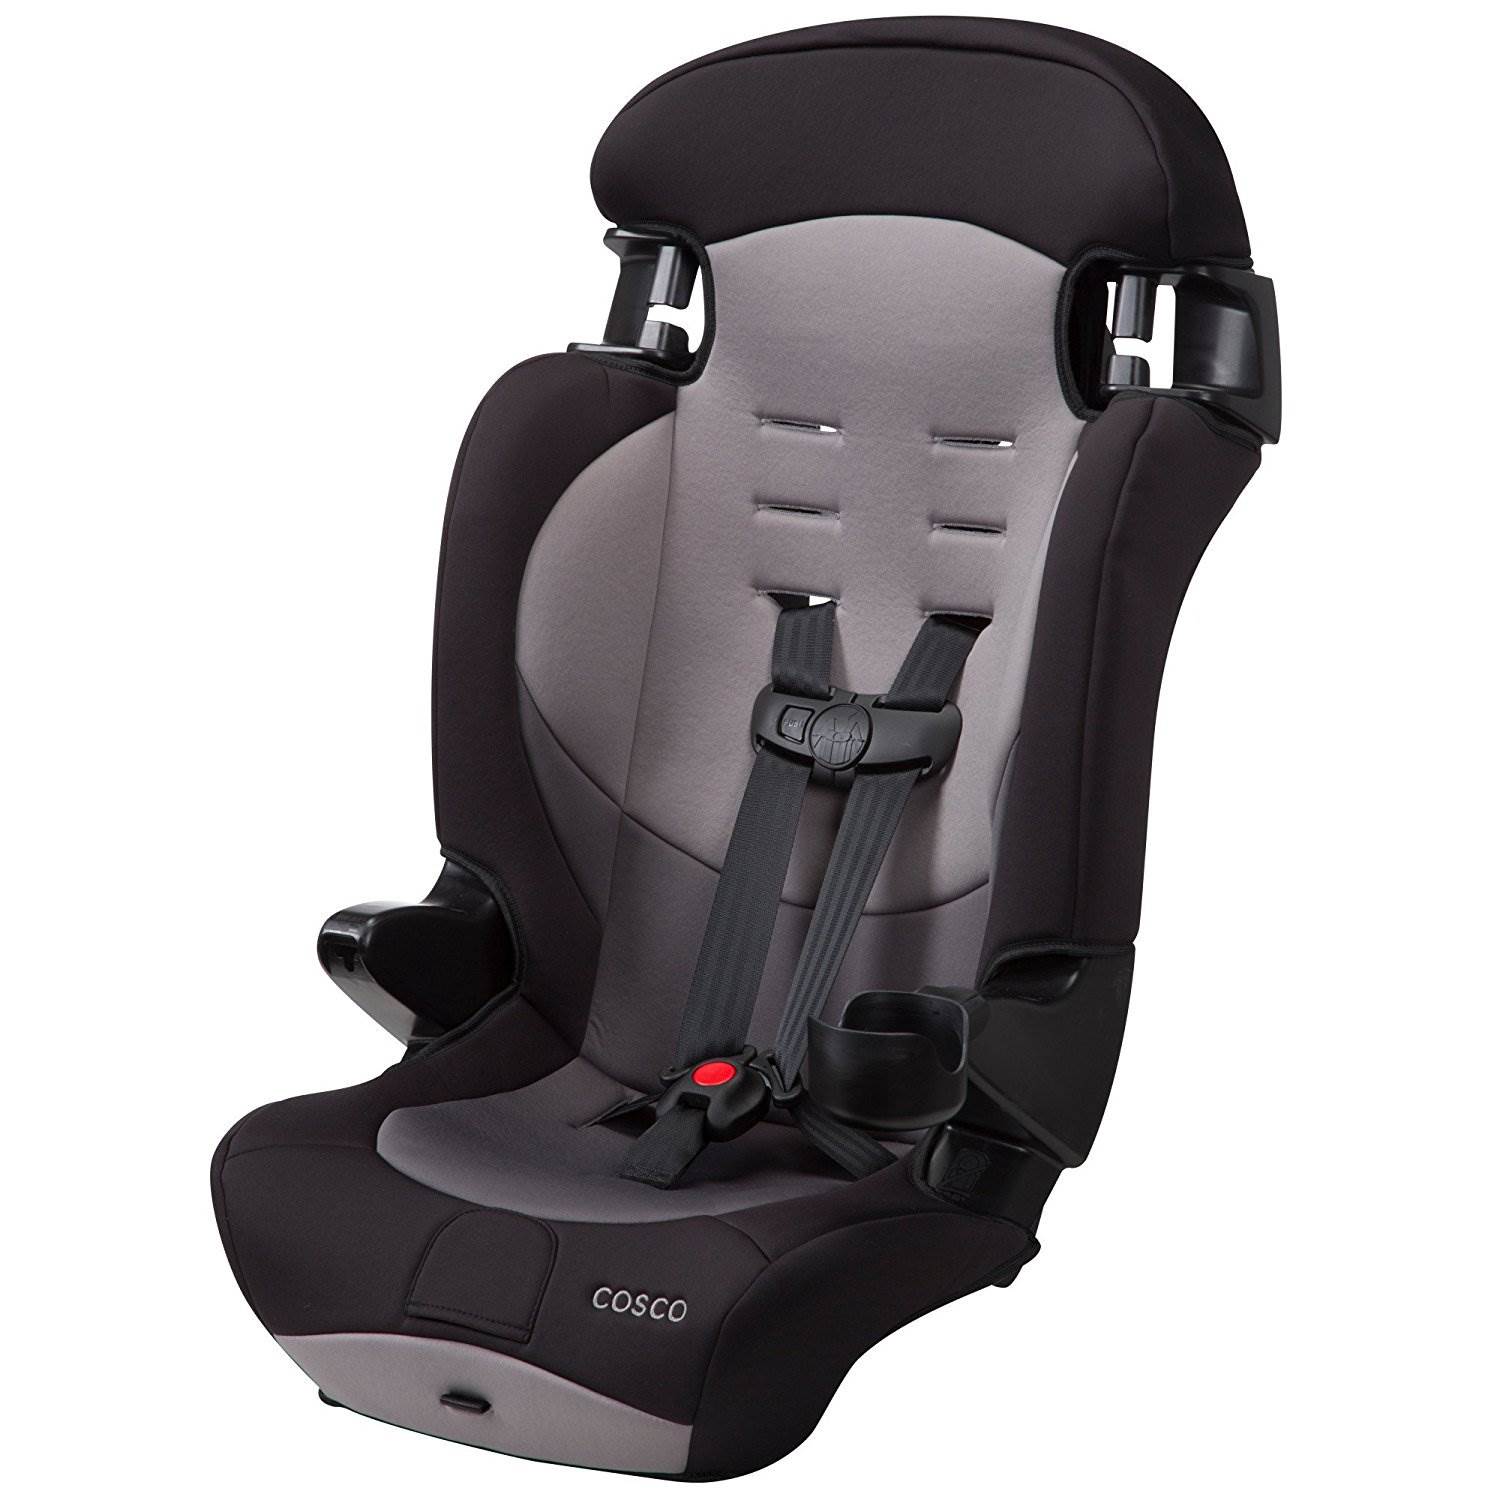 Cosco Finale DX 2-in-1 Booster Car Seat, Dusk - image 4 of 7